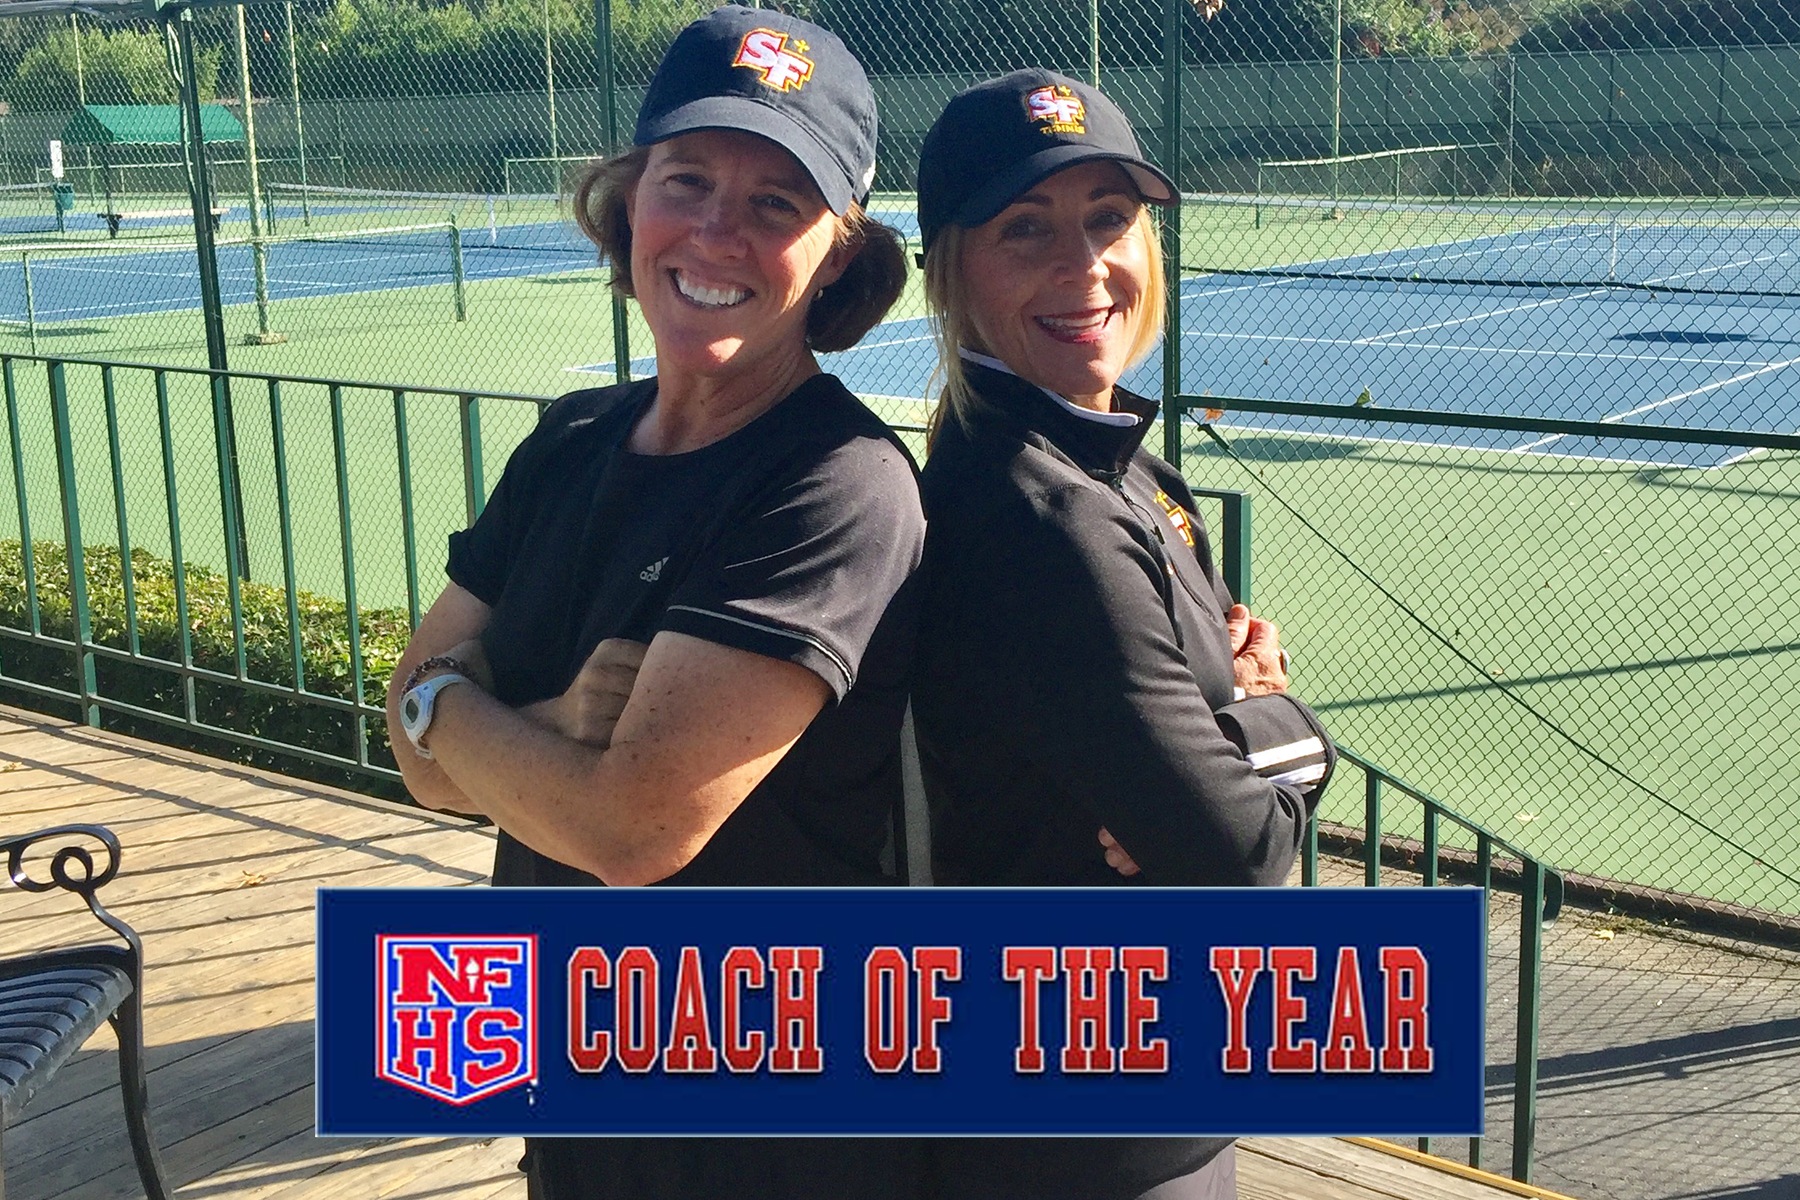 Soccer’s Robinson and Tennis’ Spector Named Section Coaches of the Year